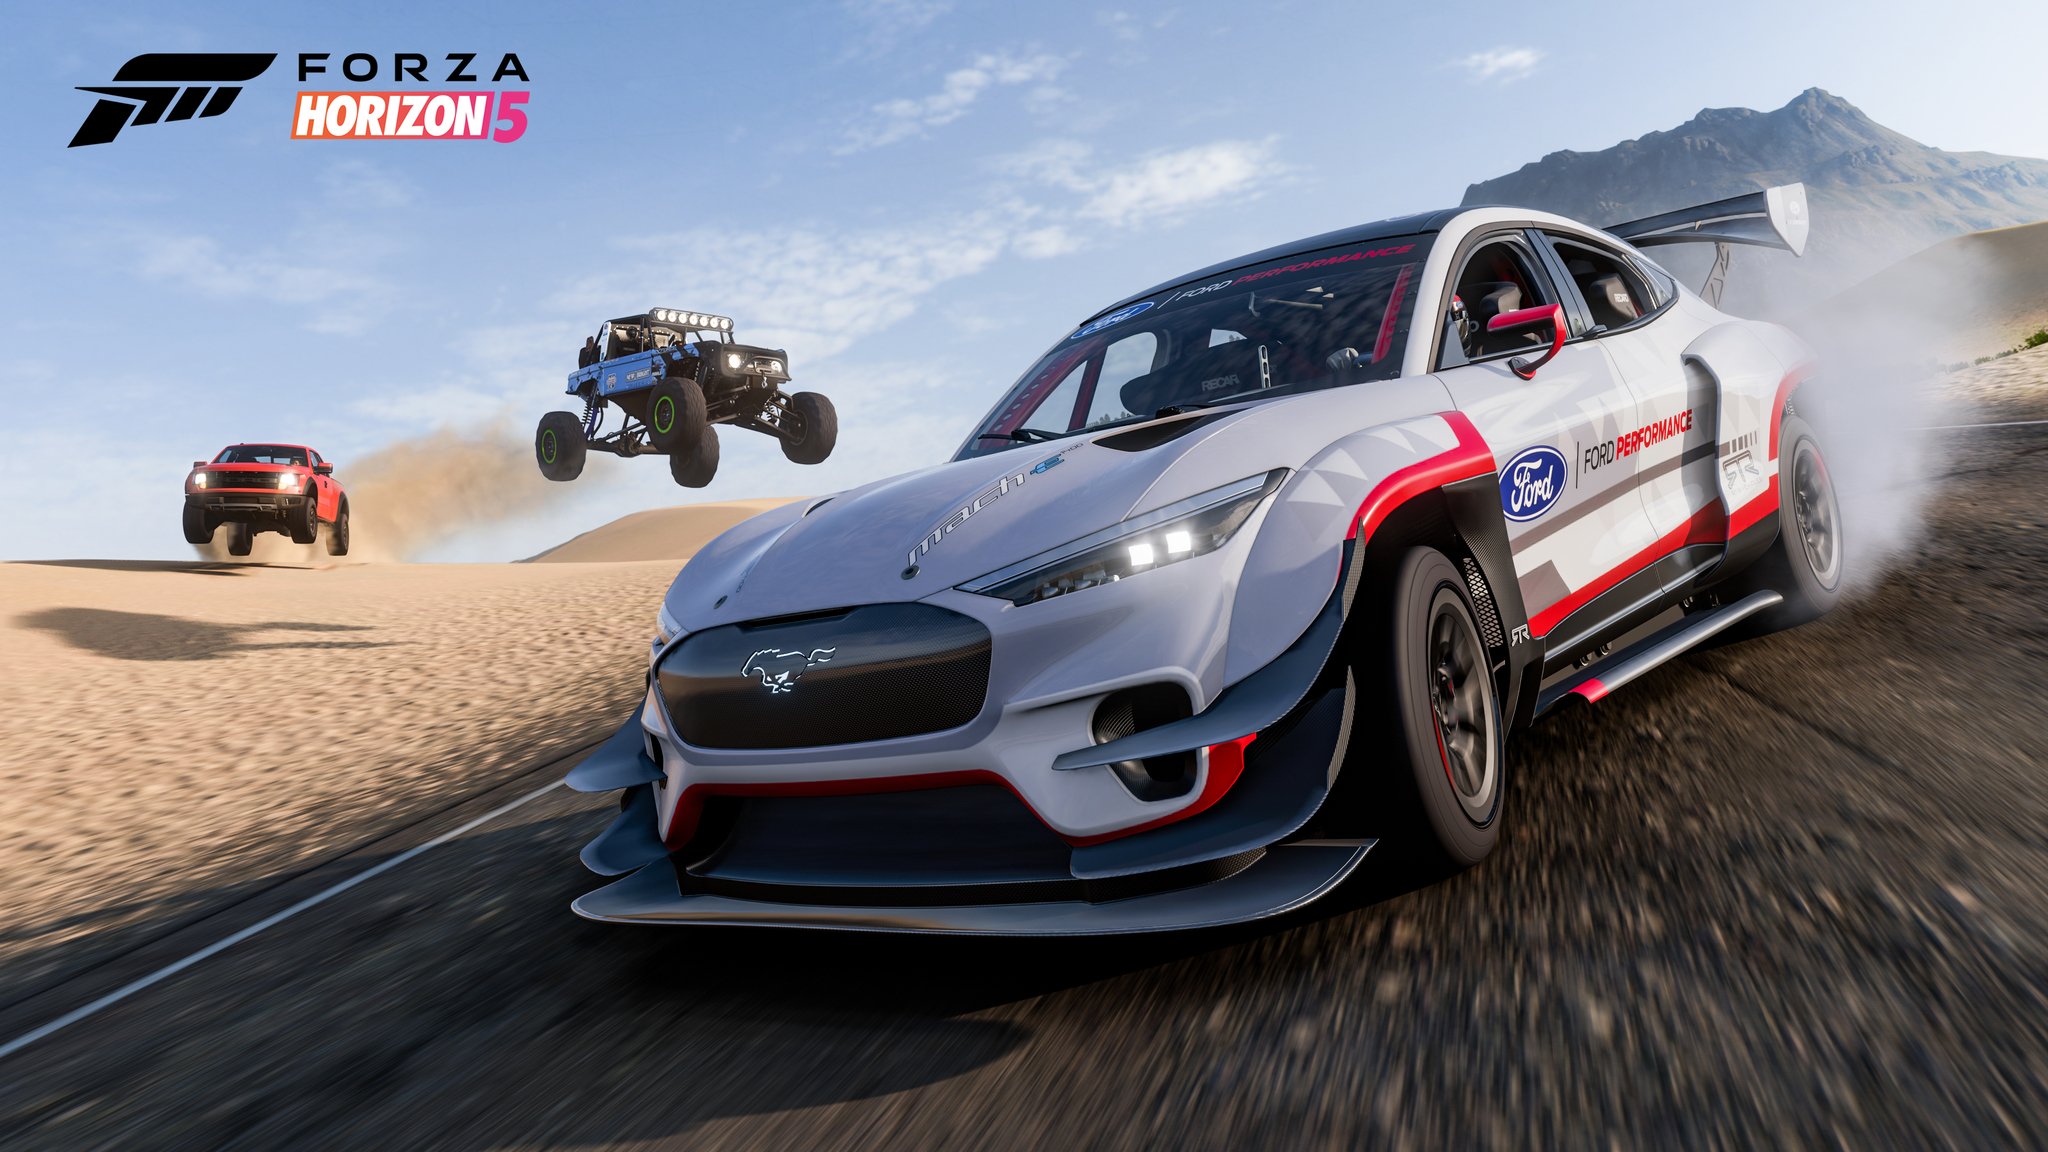 Forza Horizon 5 download: How to download Forza Horizon 5 on PC, system  requirements, download size, and more